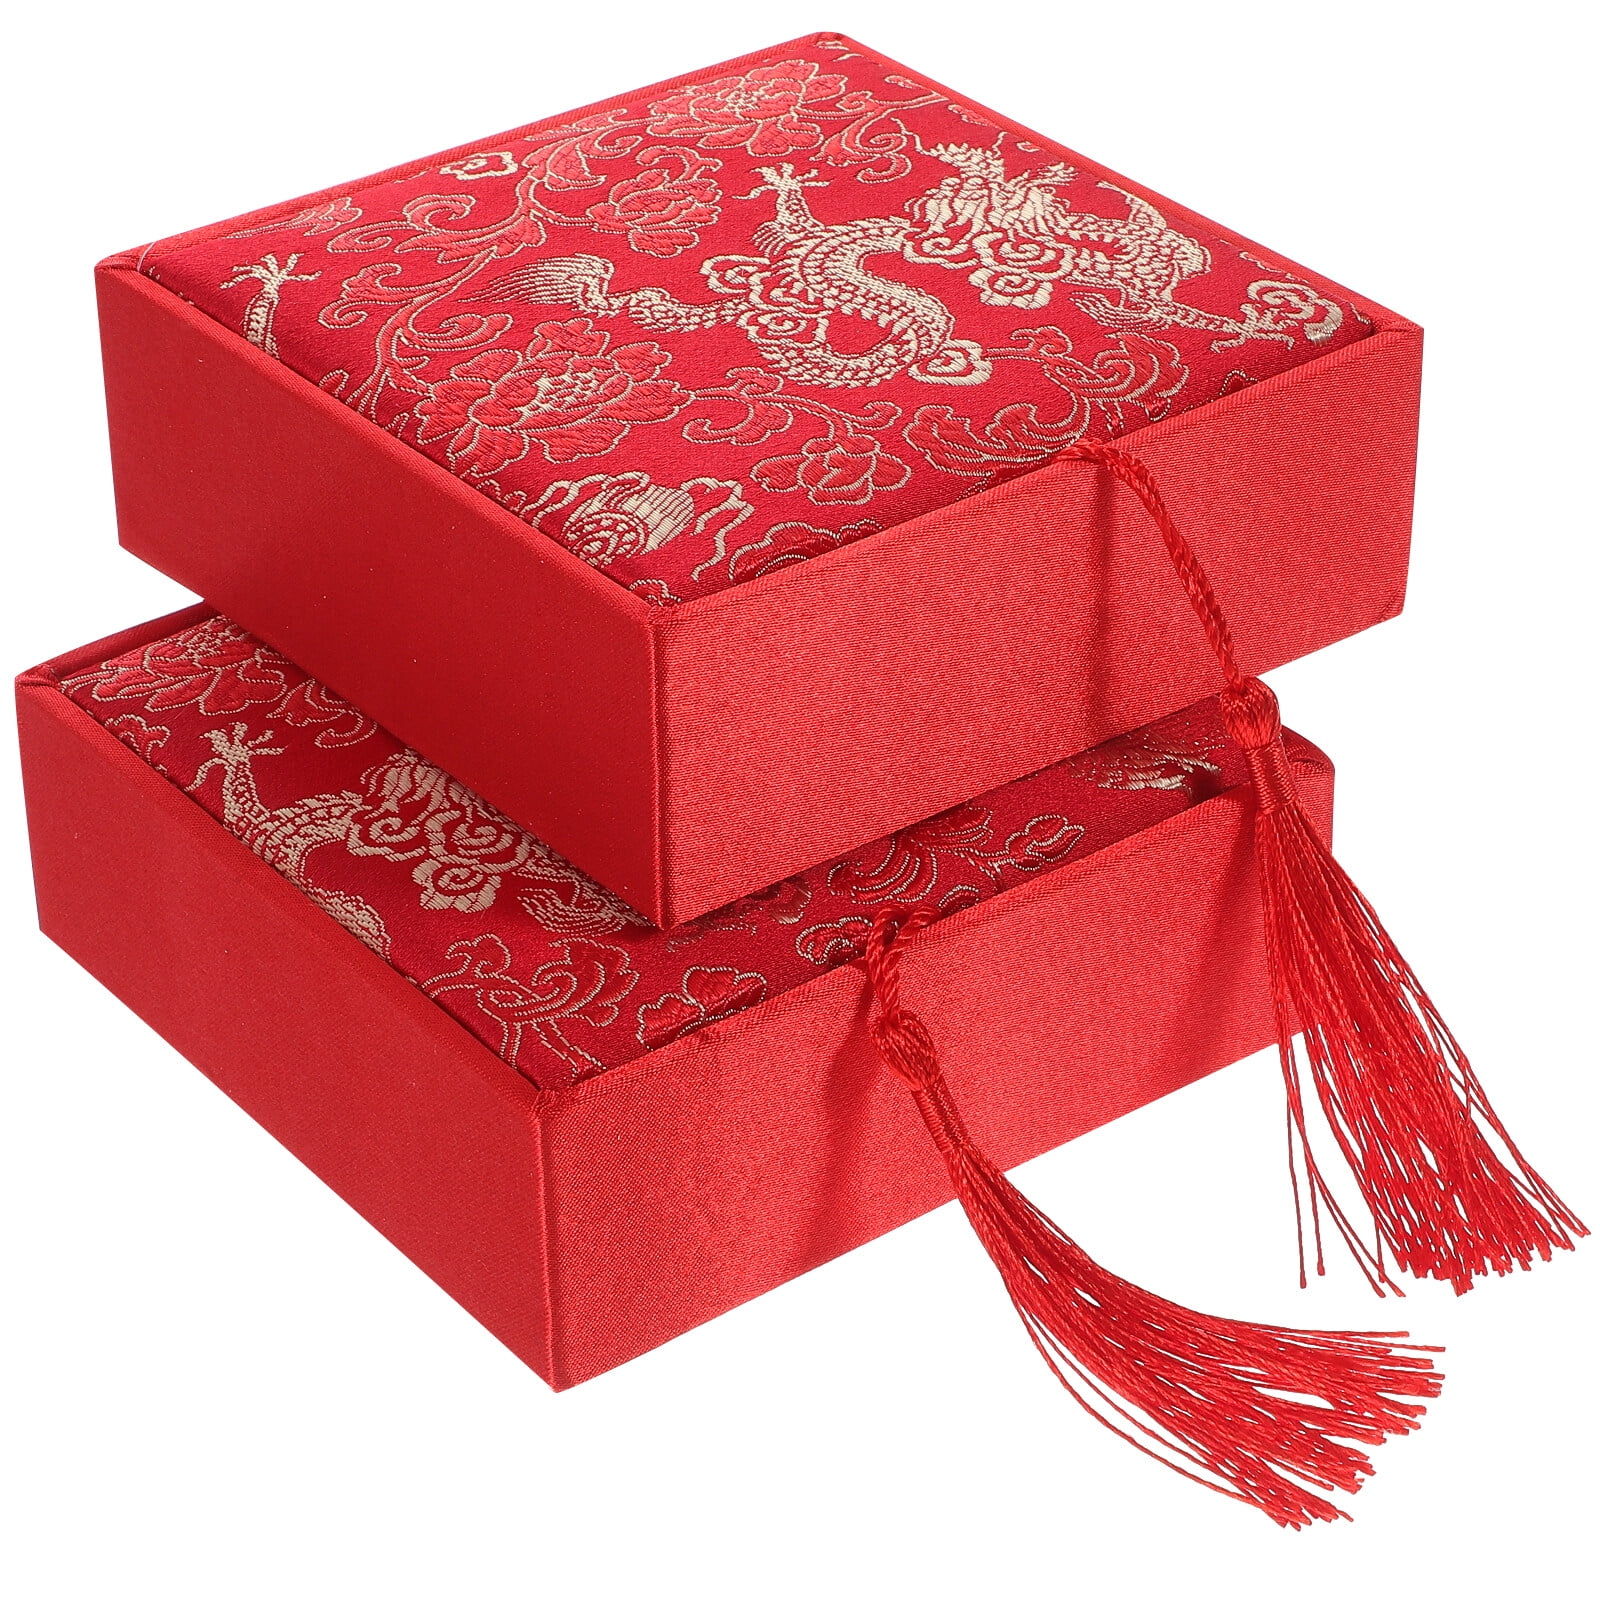 NUOLUX 2 Pcs Chinese Style Brocade Gift Box Satin Jewelry Case Rosary  Bearer Bracelet Container Bangle Holder for Display - Golden Loong Pattern  (Red Background) 